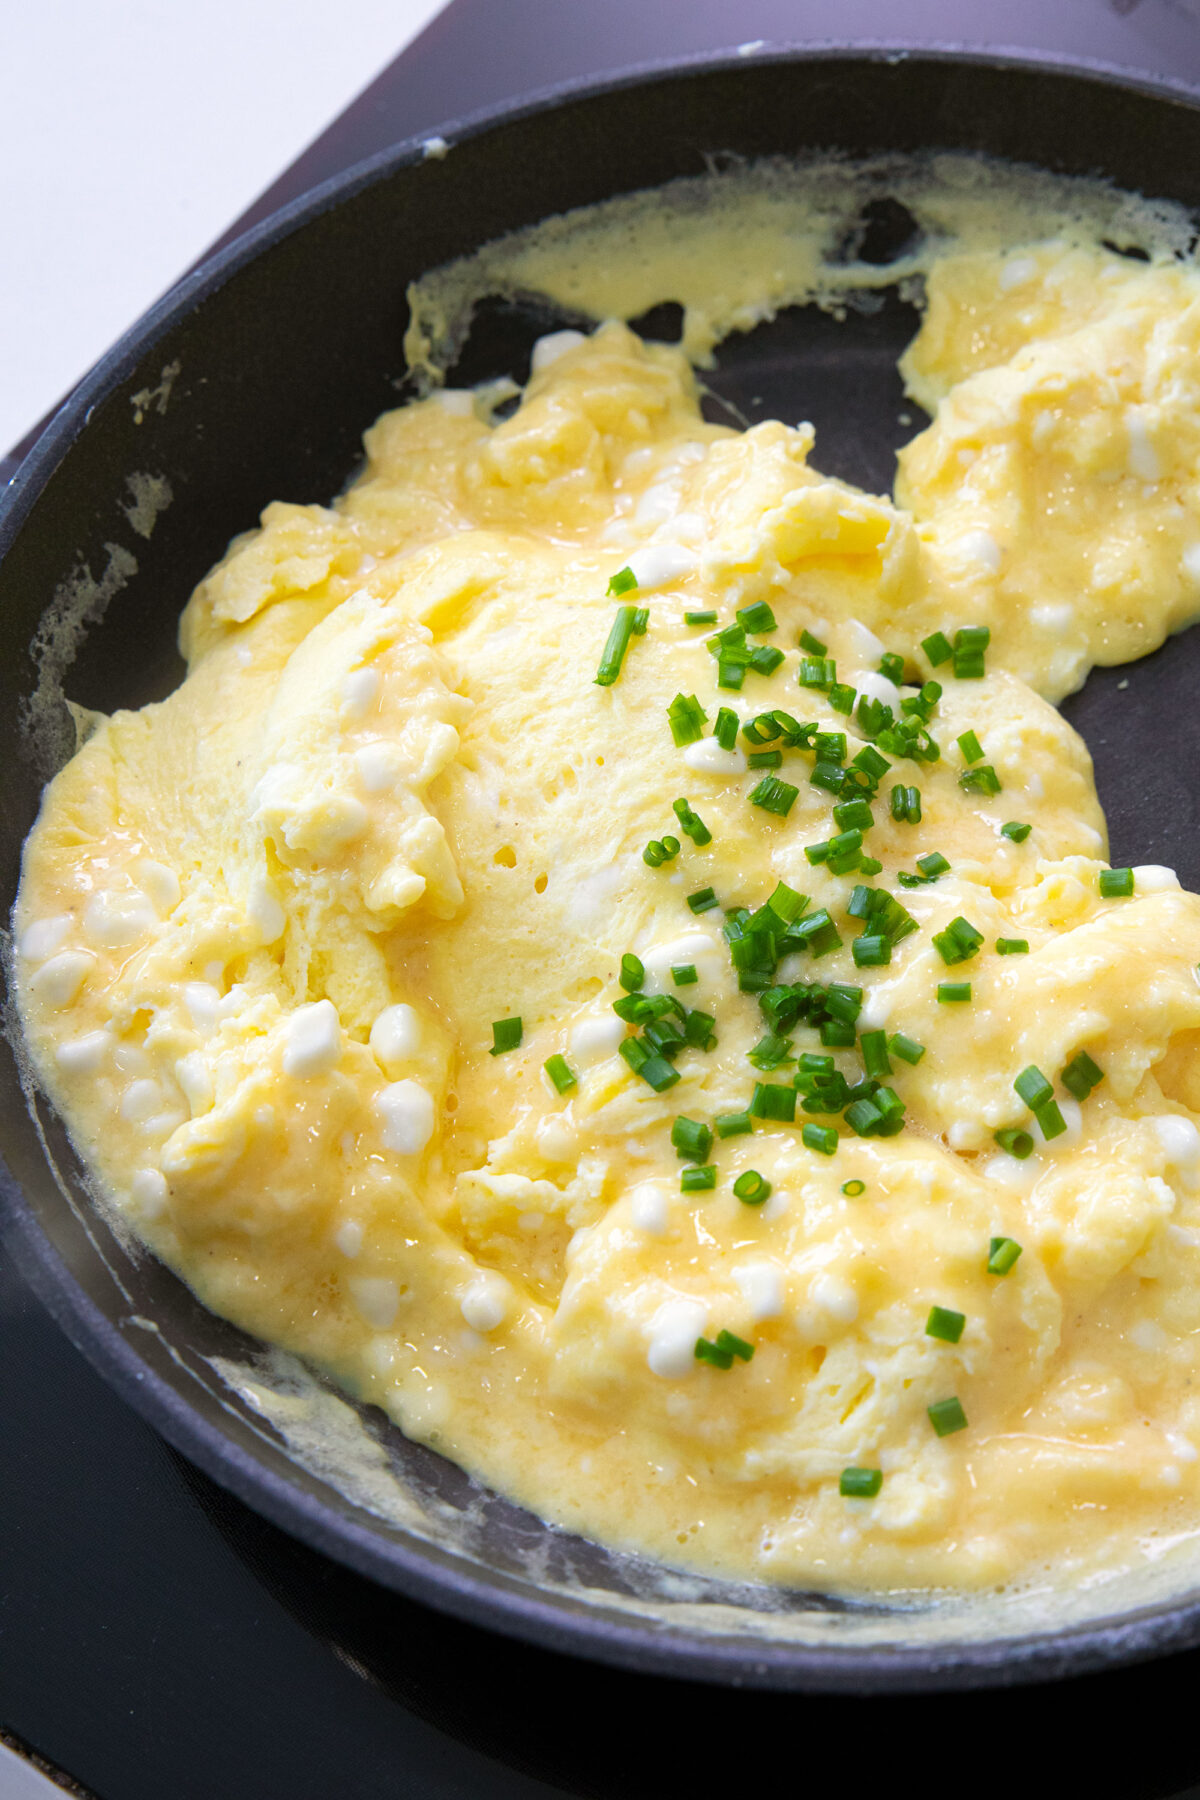 cooking scrambled eggs in a skillet